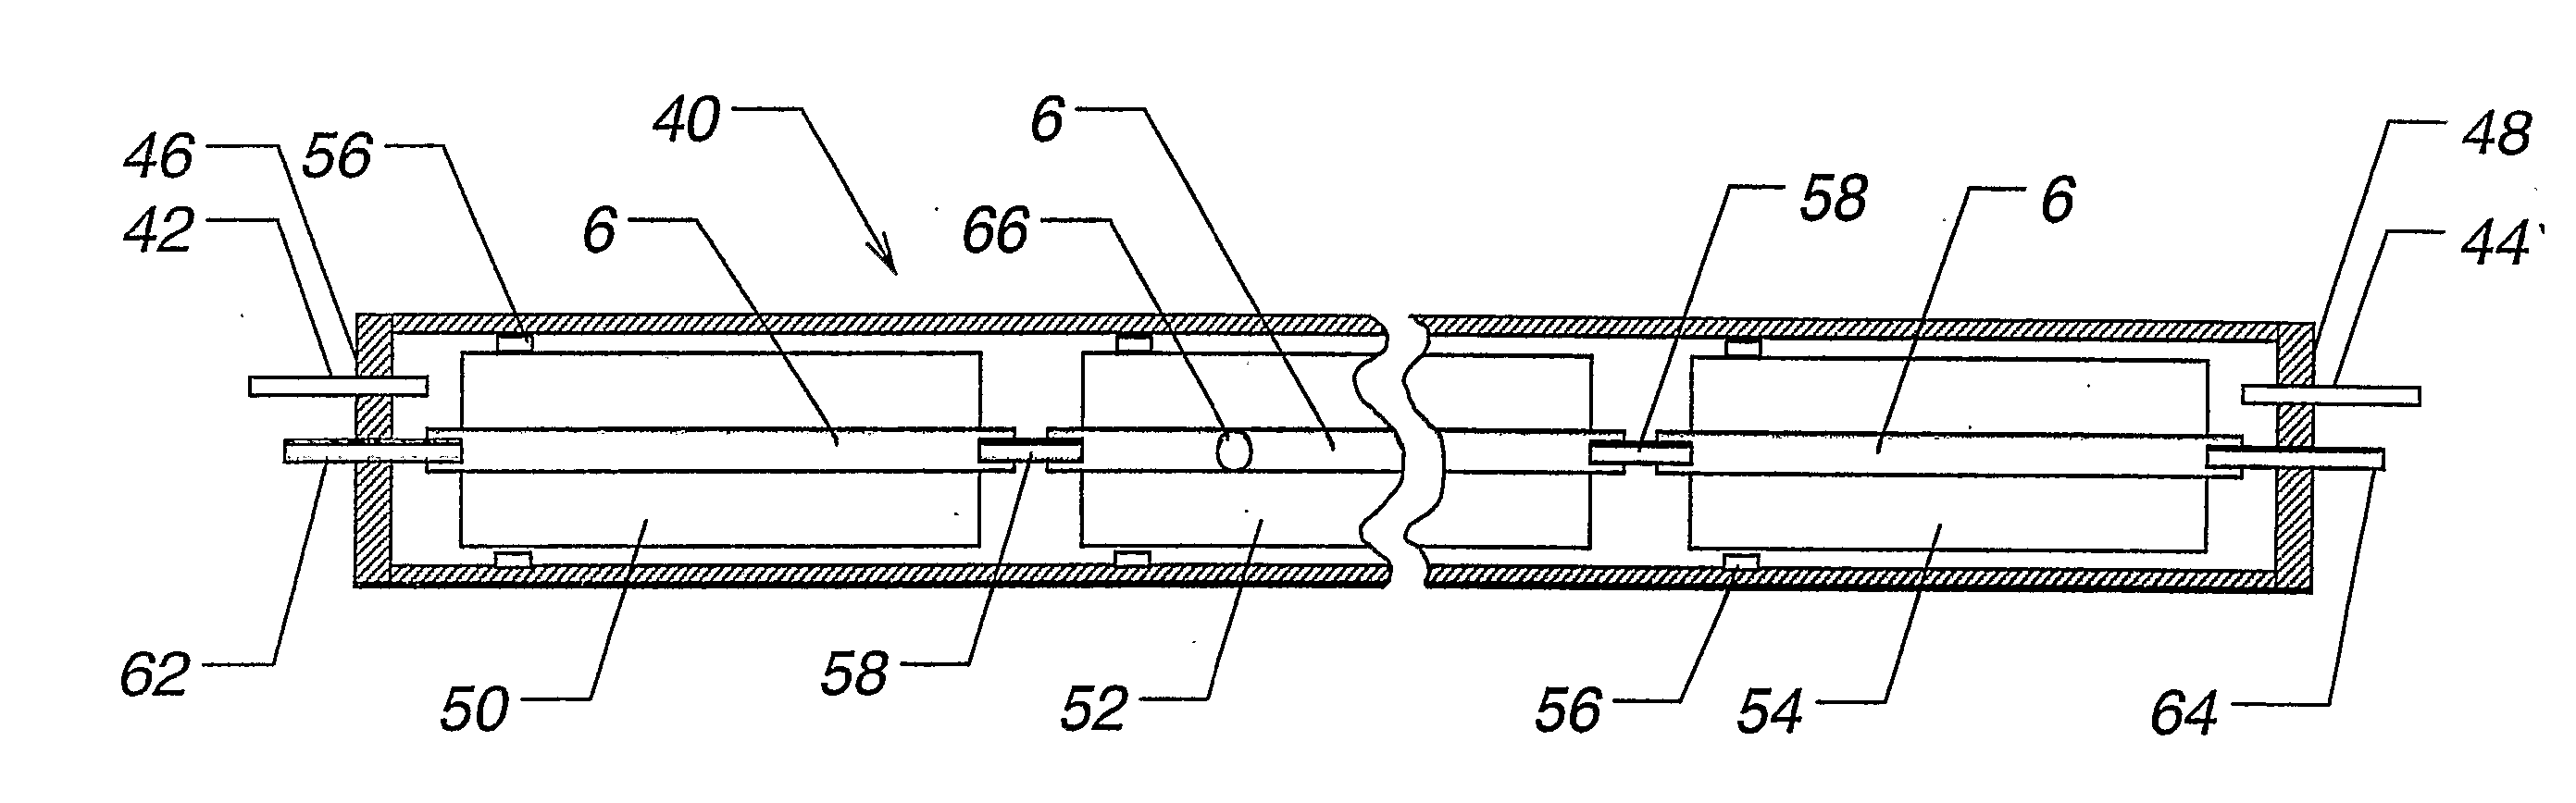 Apparatus for Treating Solutions of High Osmotic Strength